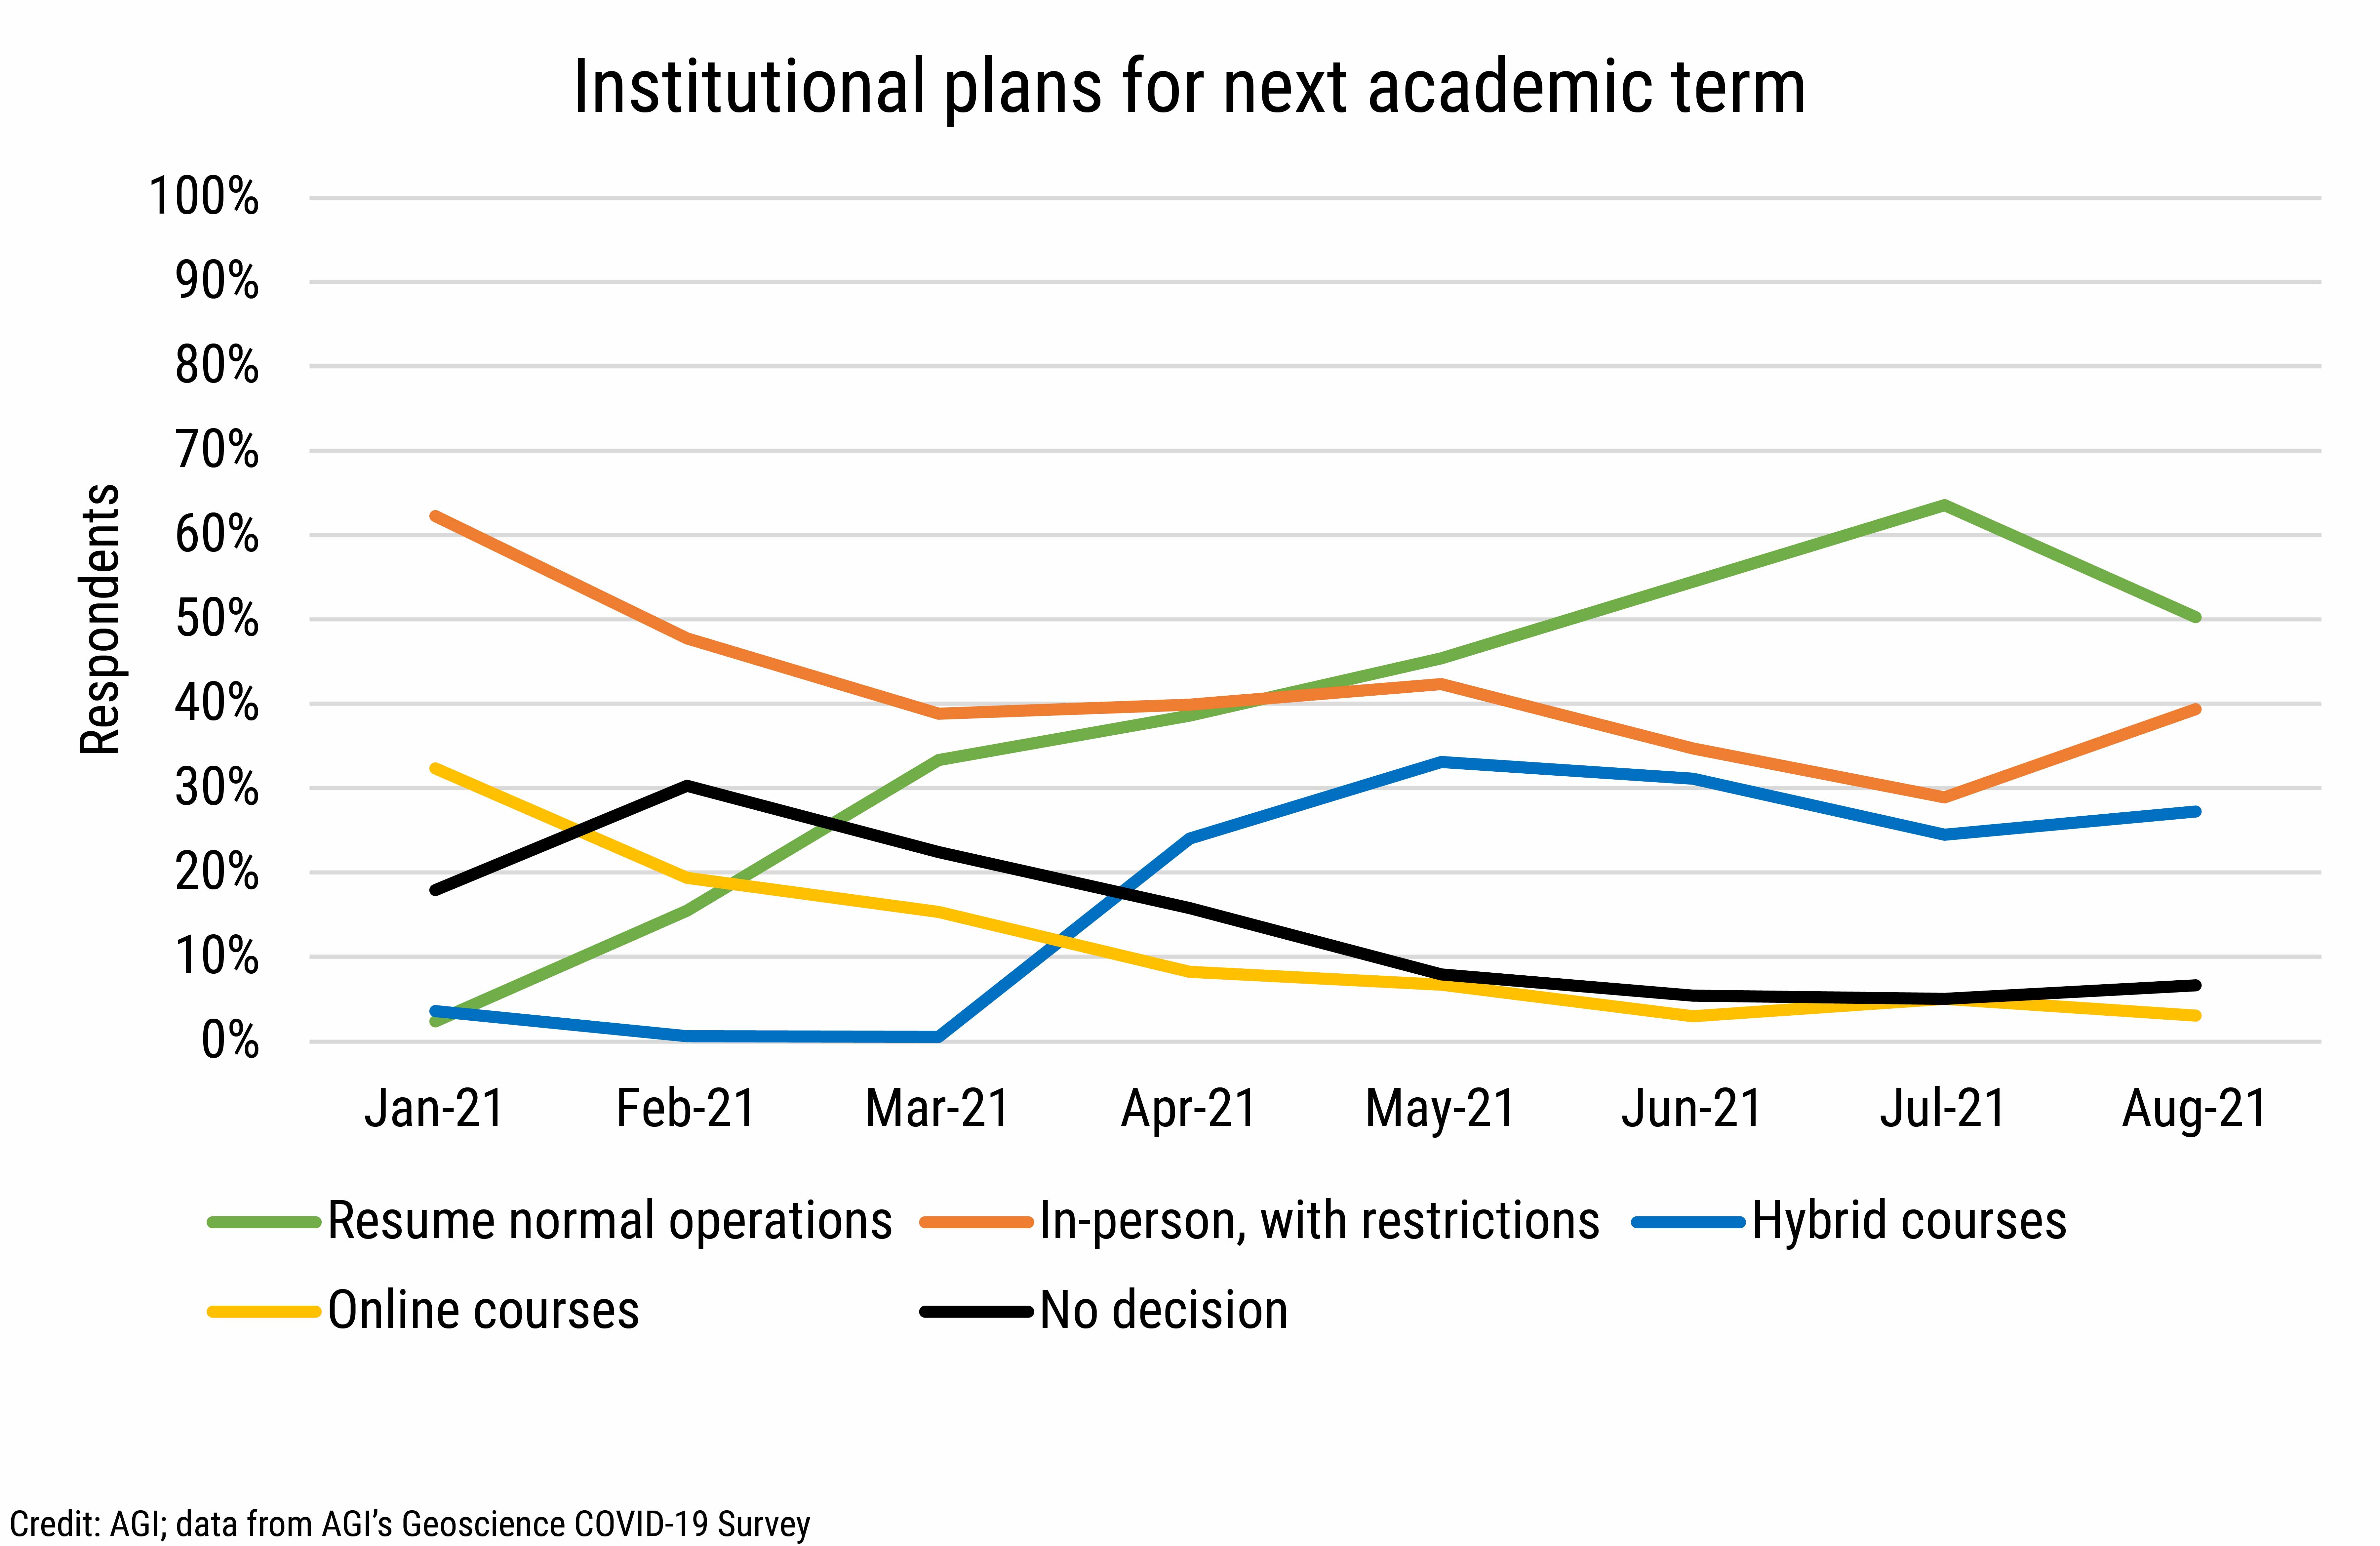 DB_2021-027 chart 09: Institutional plans for next academic term (Credit: AGI; data from AGI's Geoscience COVID-19 Survey)